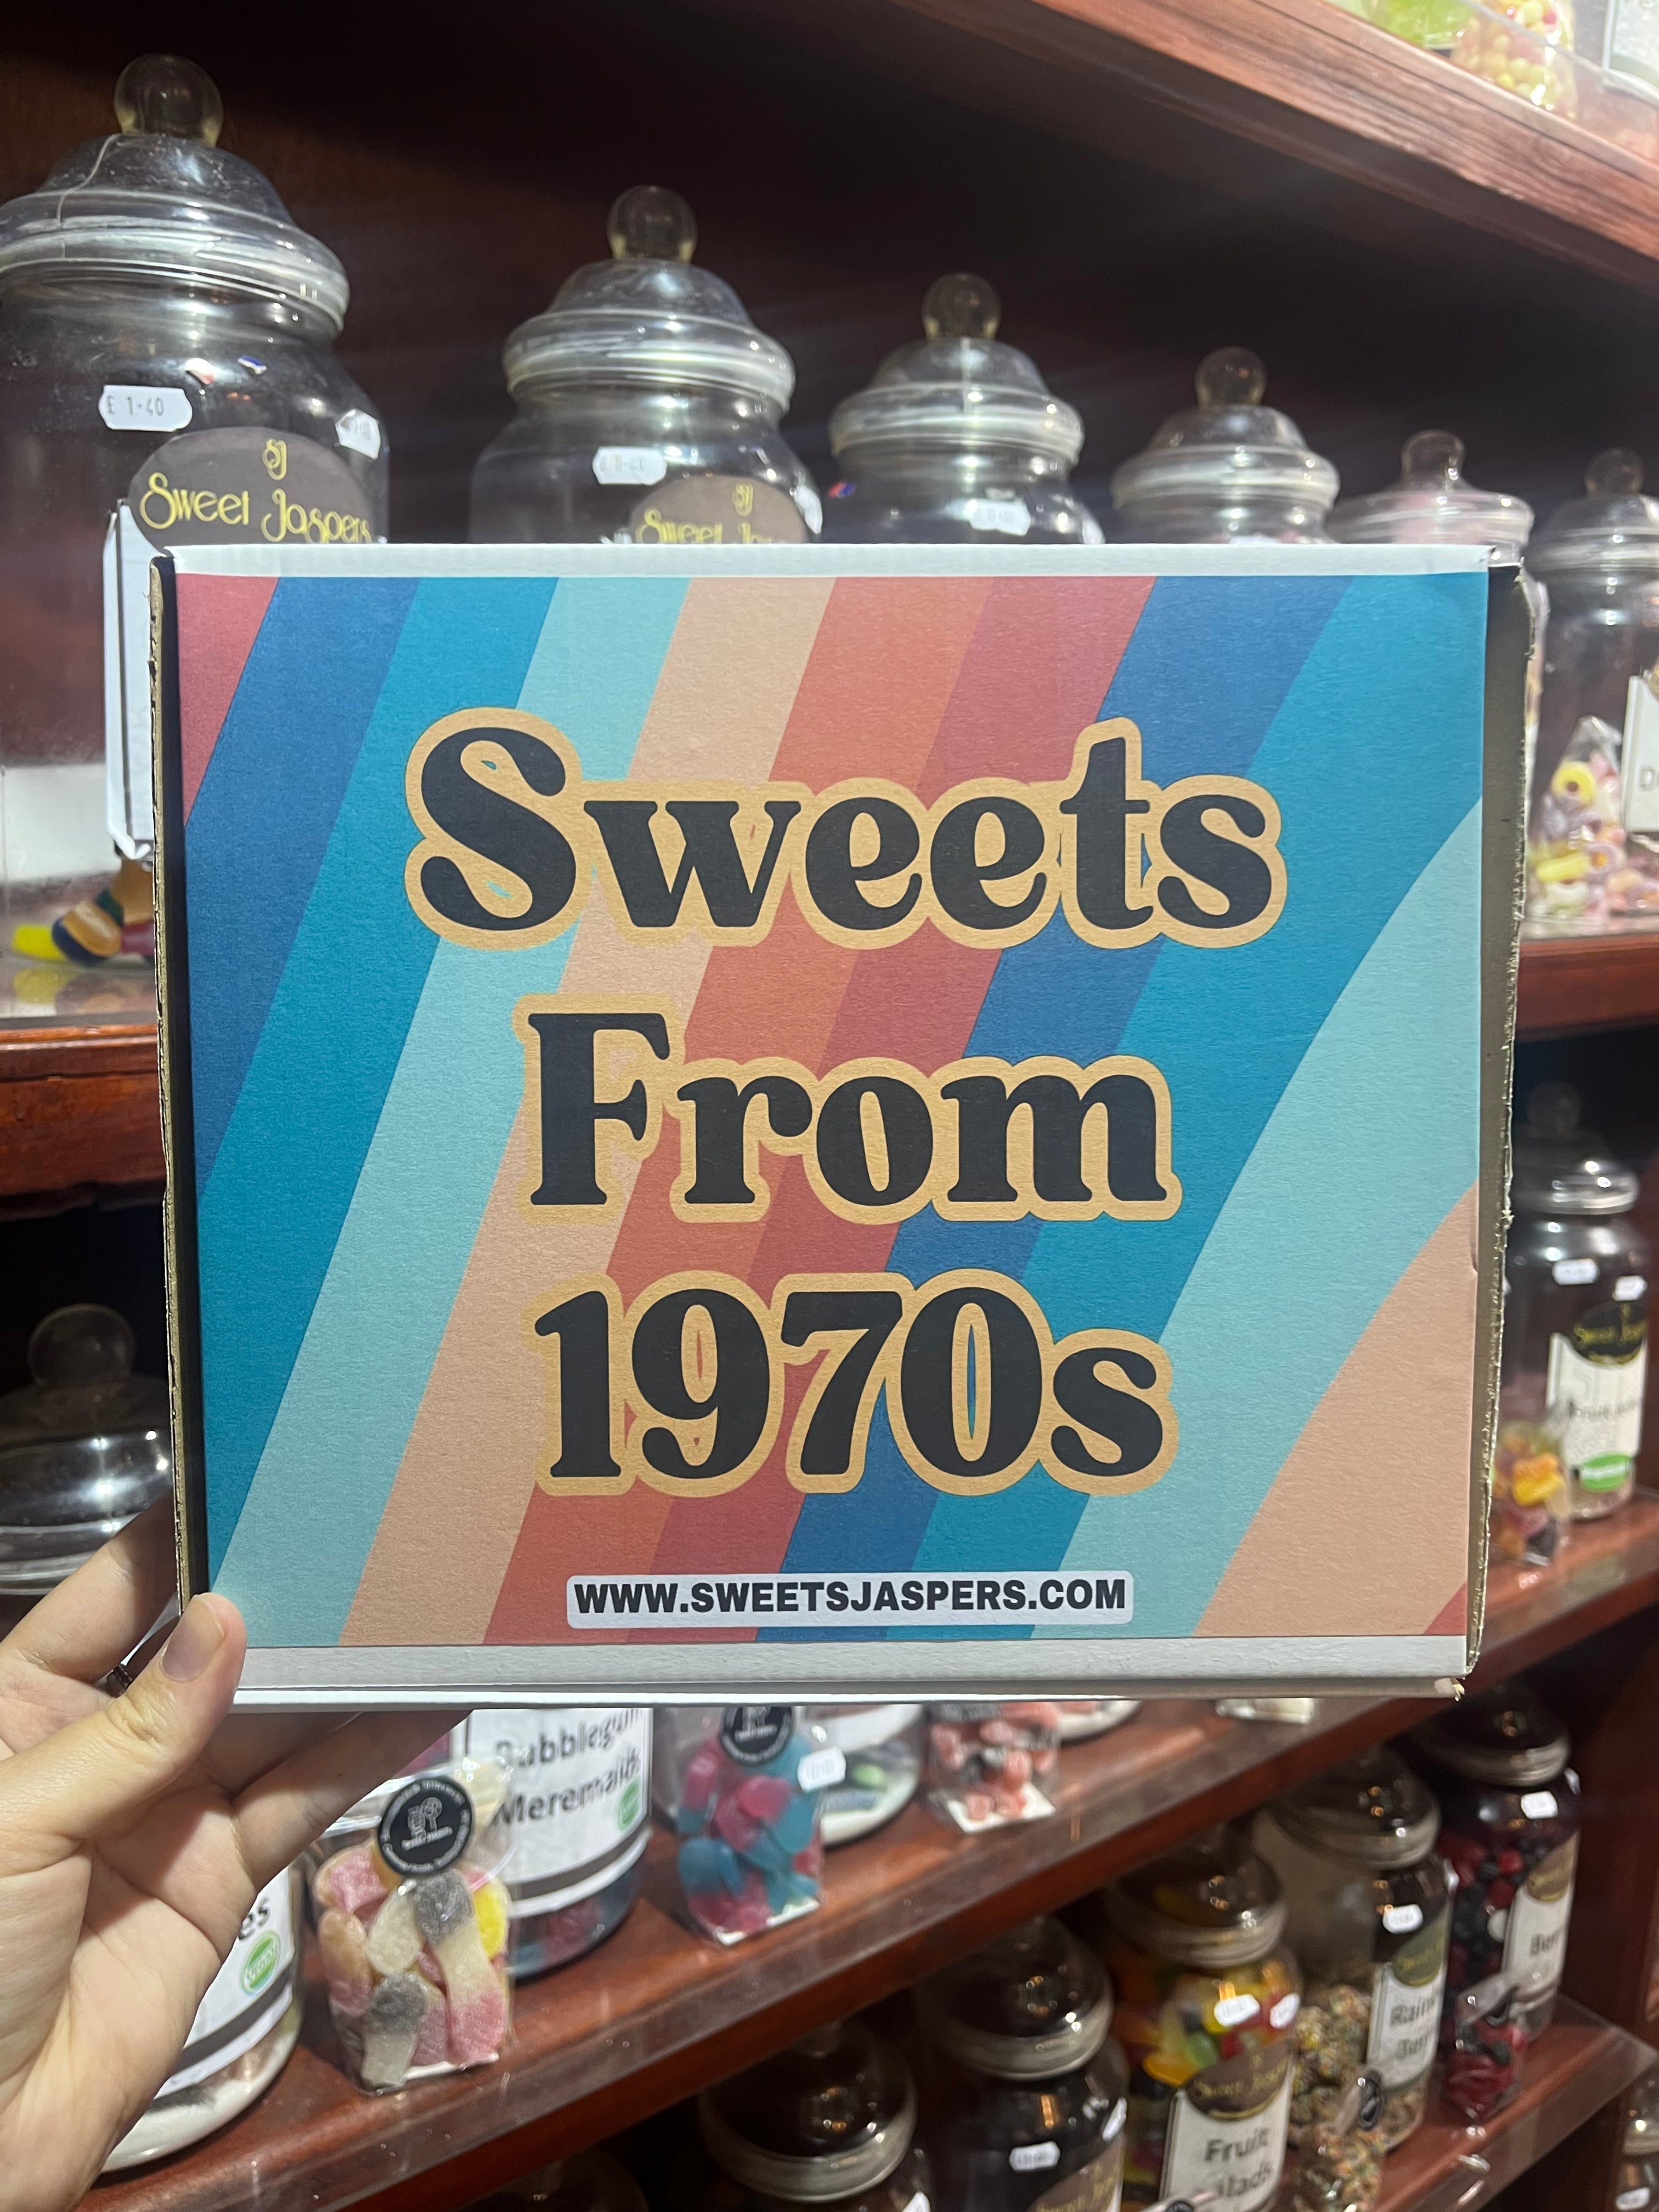 Sweets from 1970s